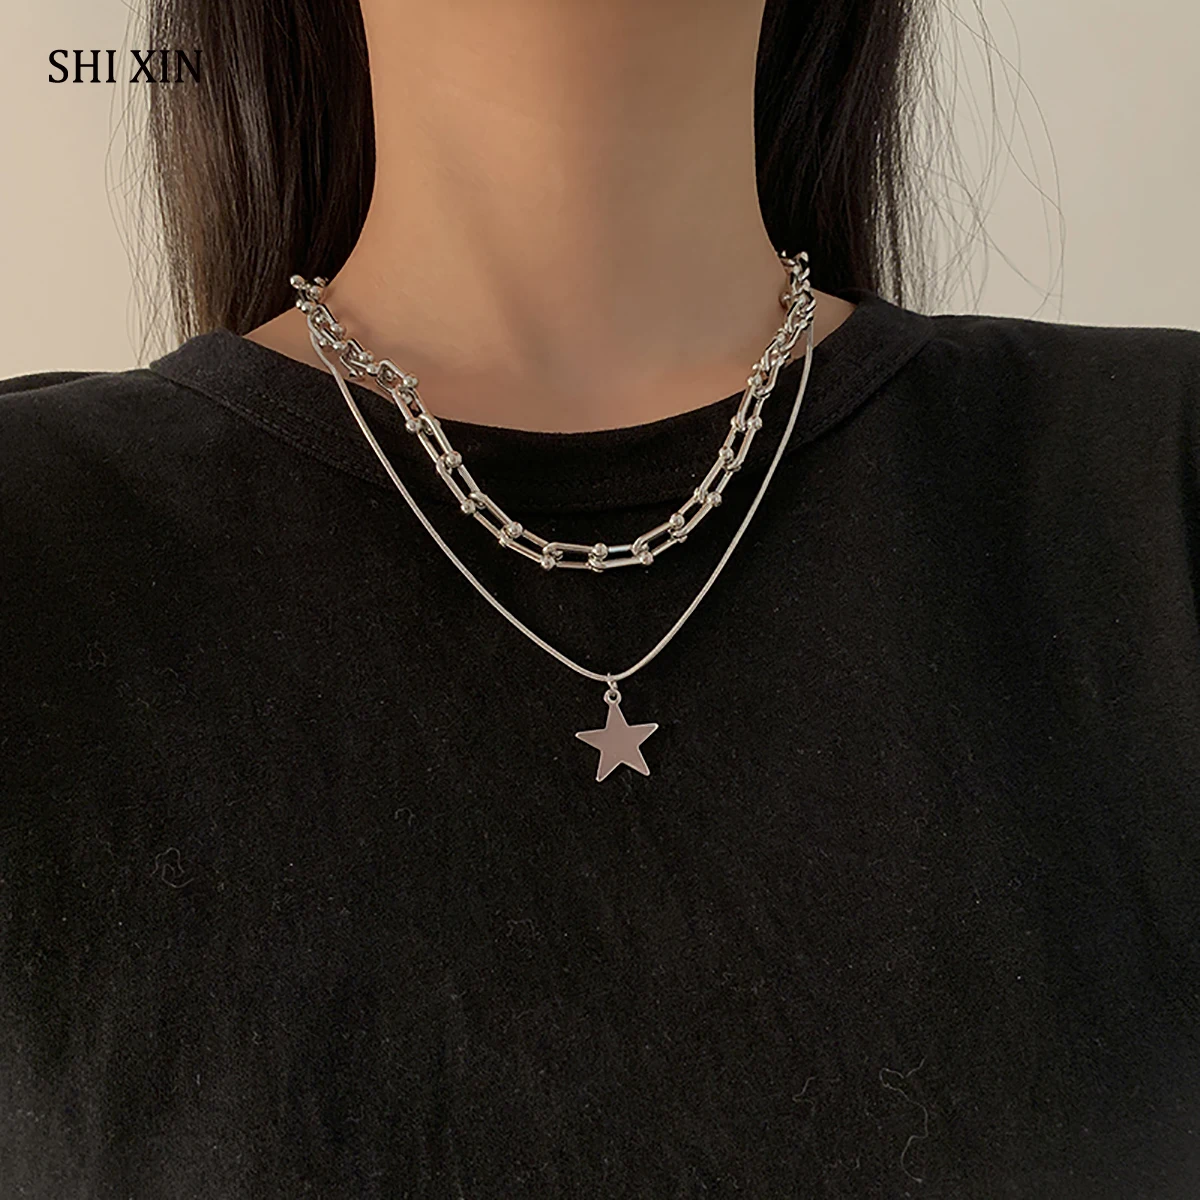 

SHIXIN Punk U Shape Link Chain Choker Necklace for Women Silver Color Layered Chain With Stars Pendant Necklace on the Neck 2021